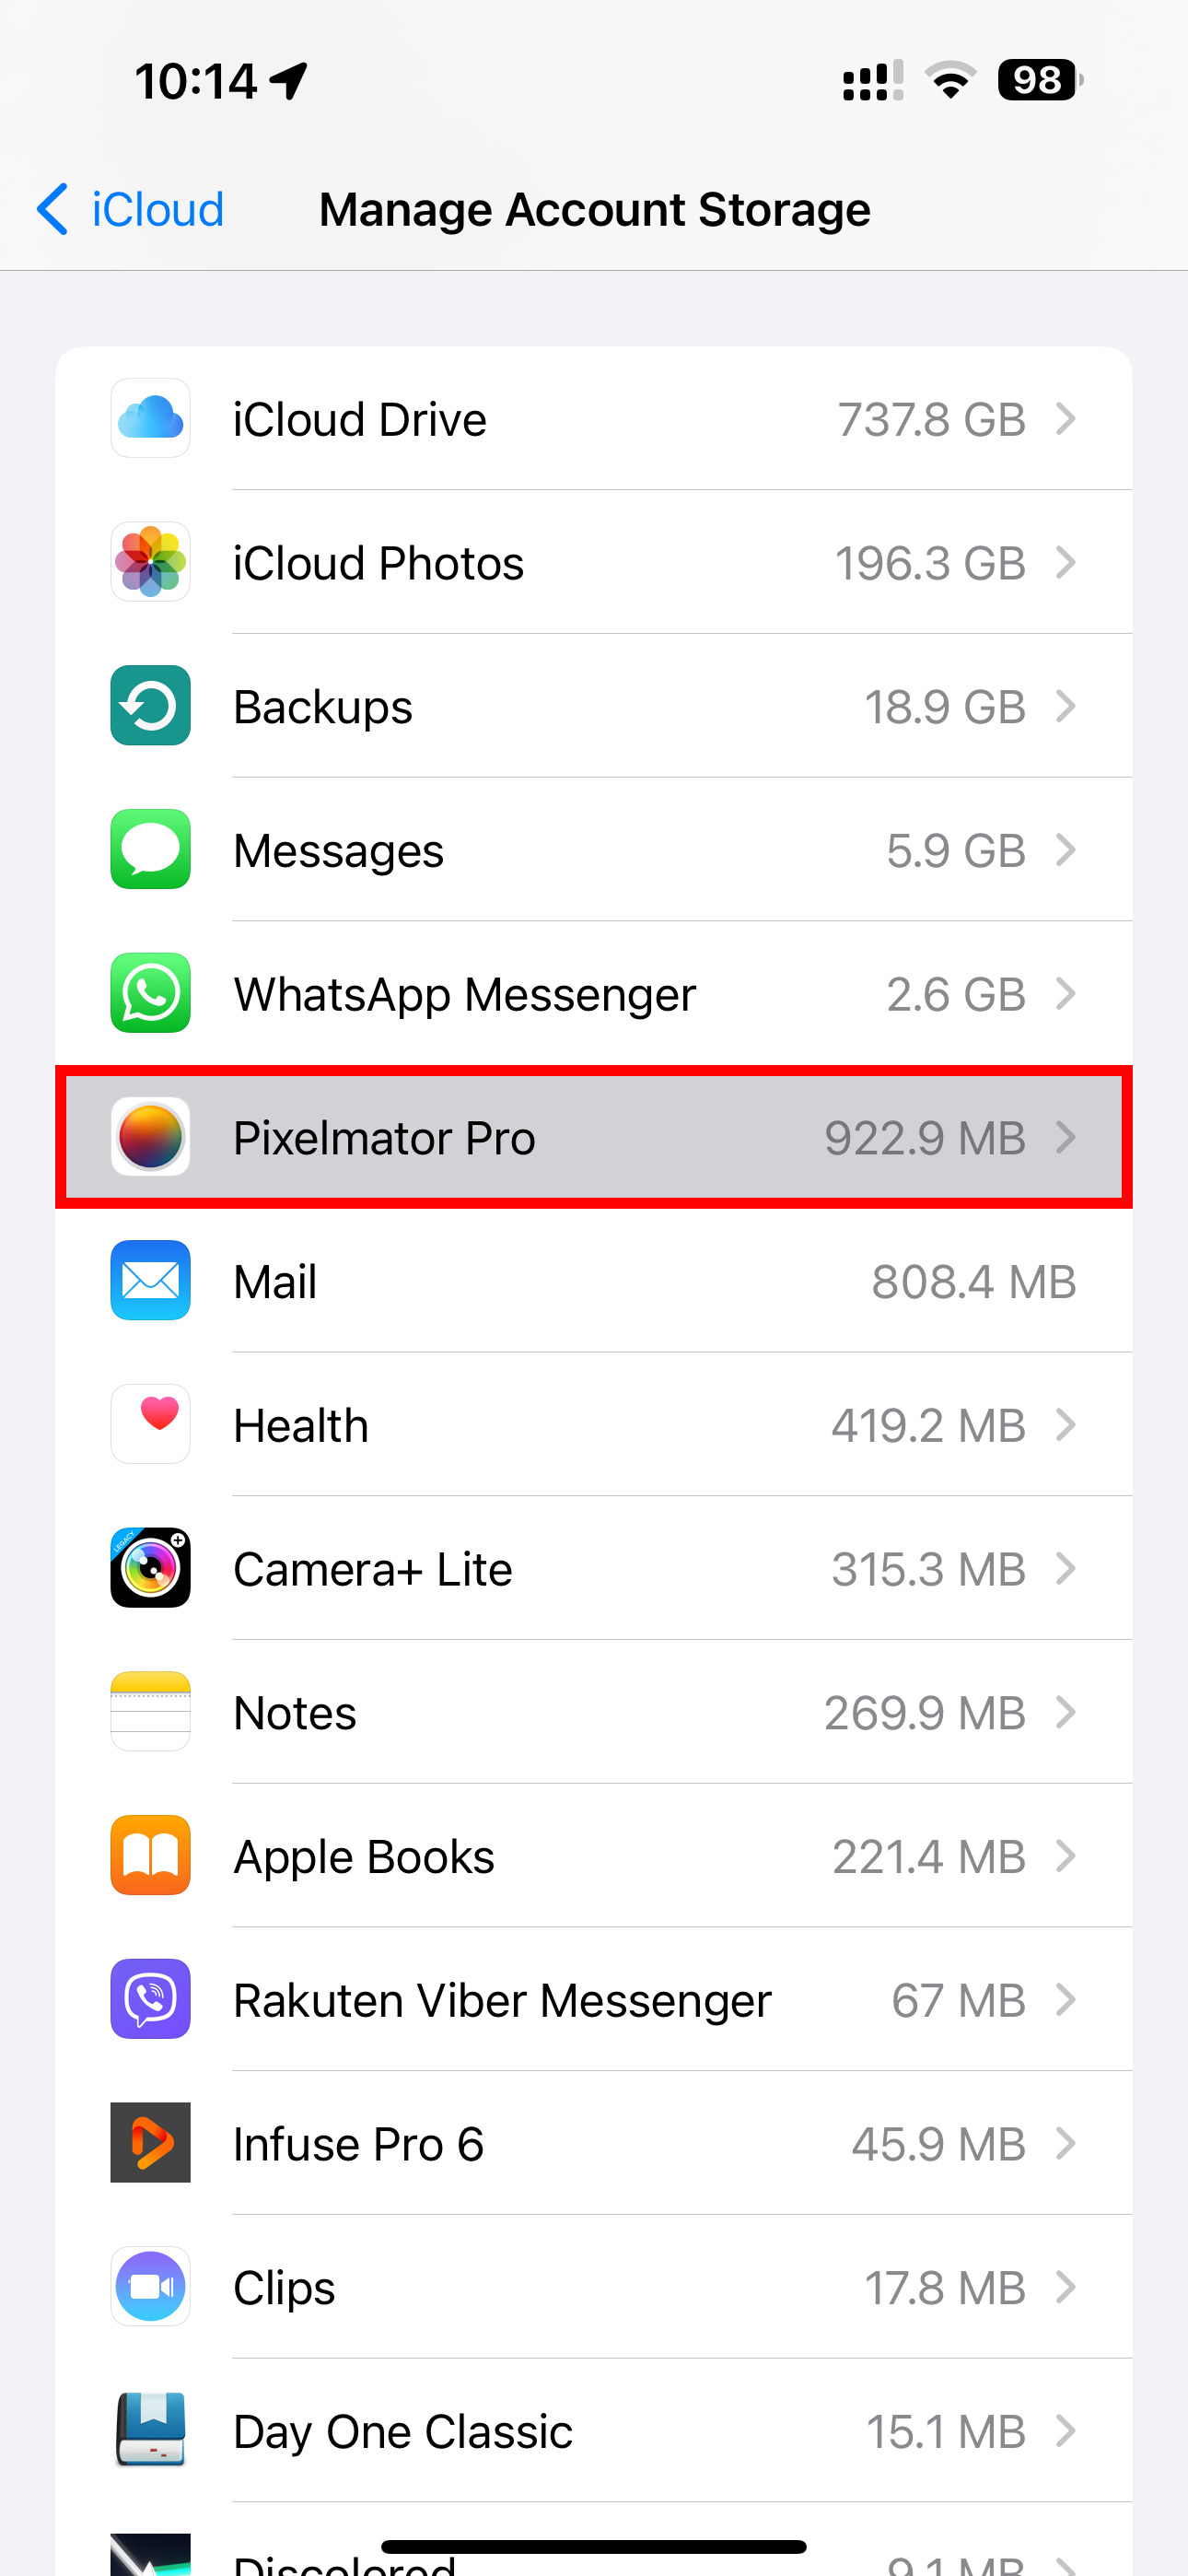 The Pixelmator Pro app selected on the iCloud storage screen in Settings on iPhone.